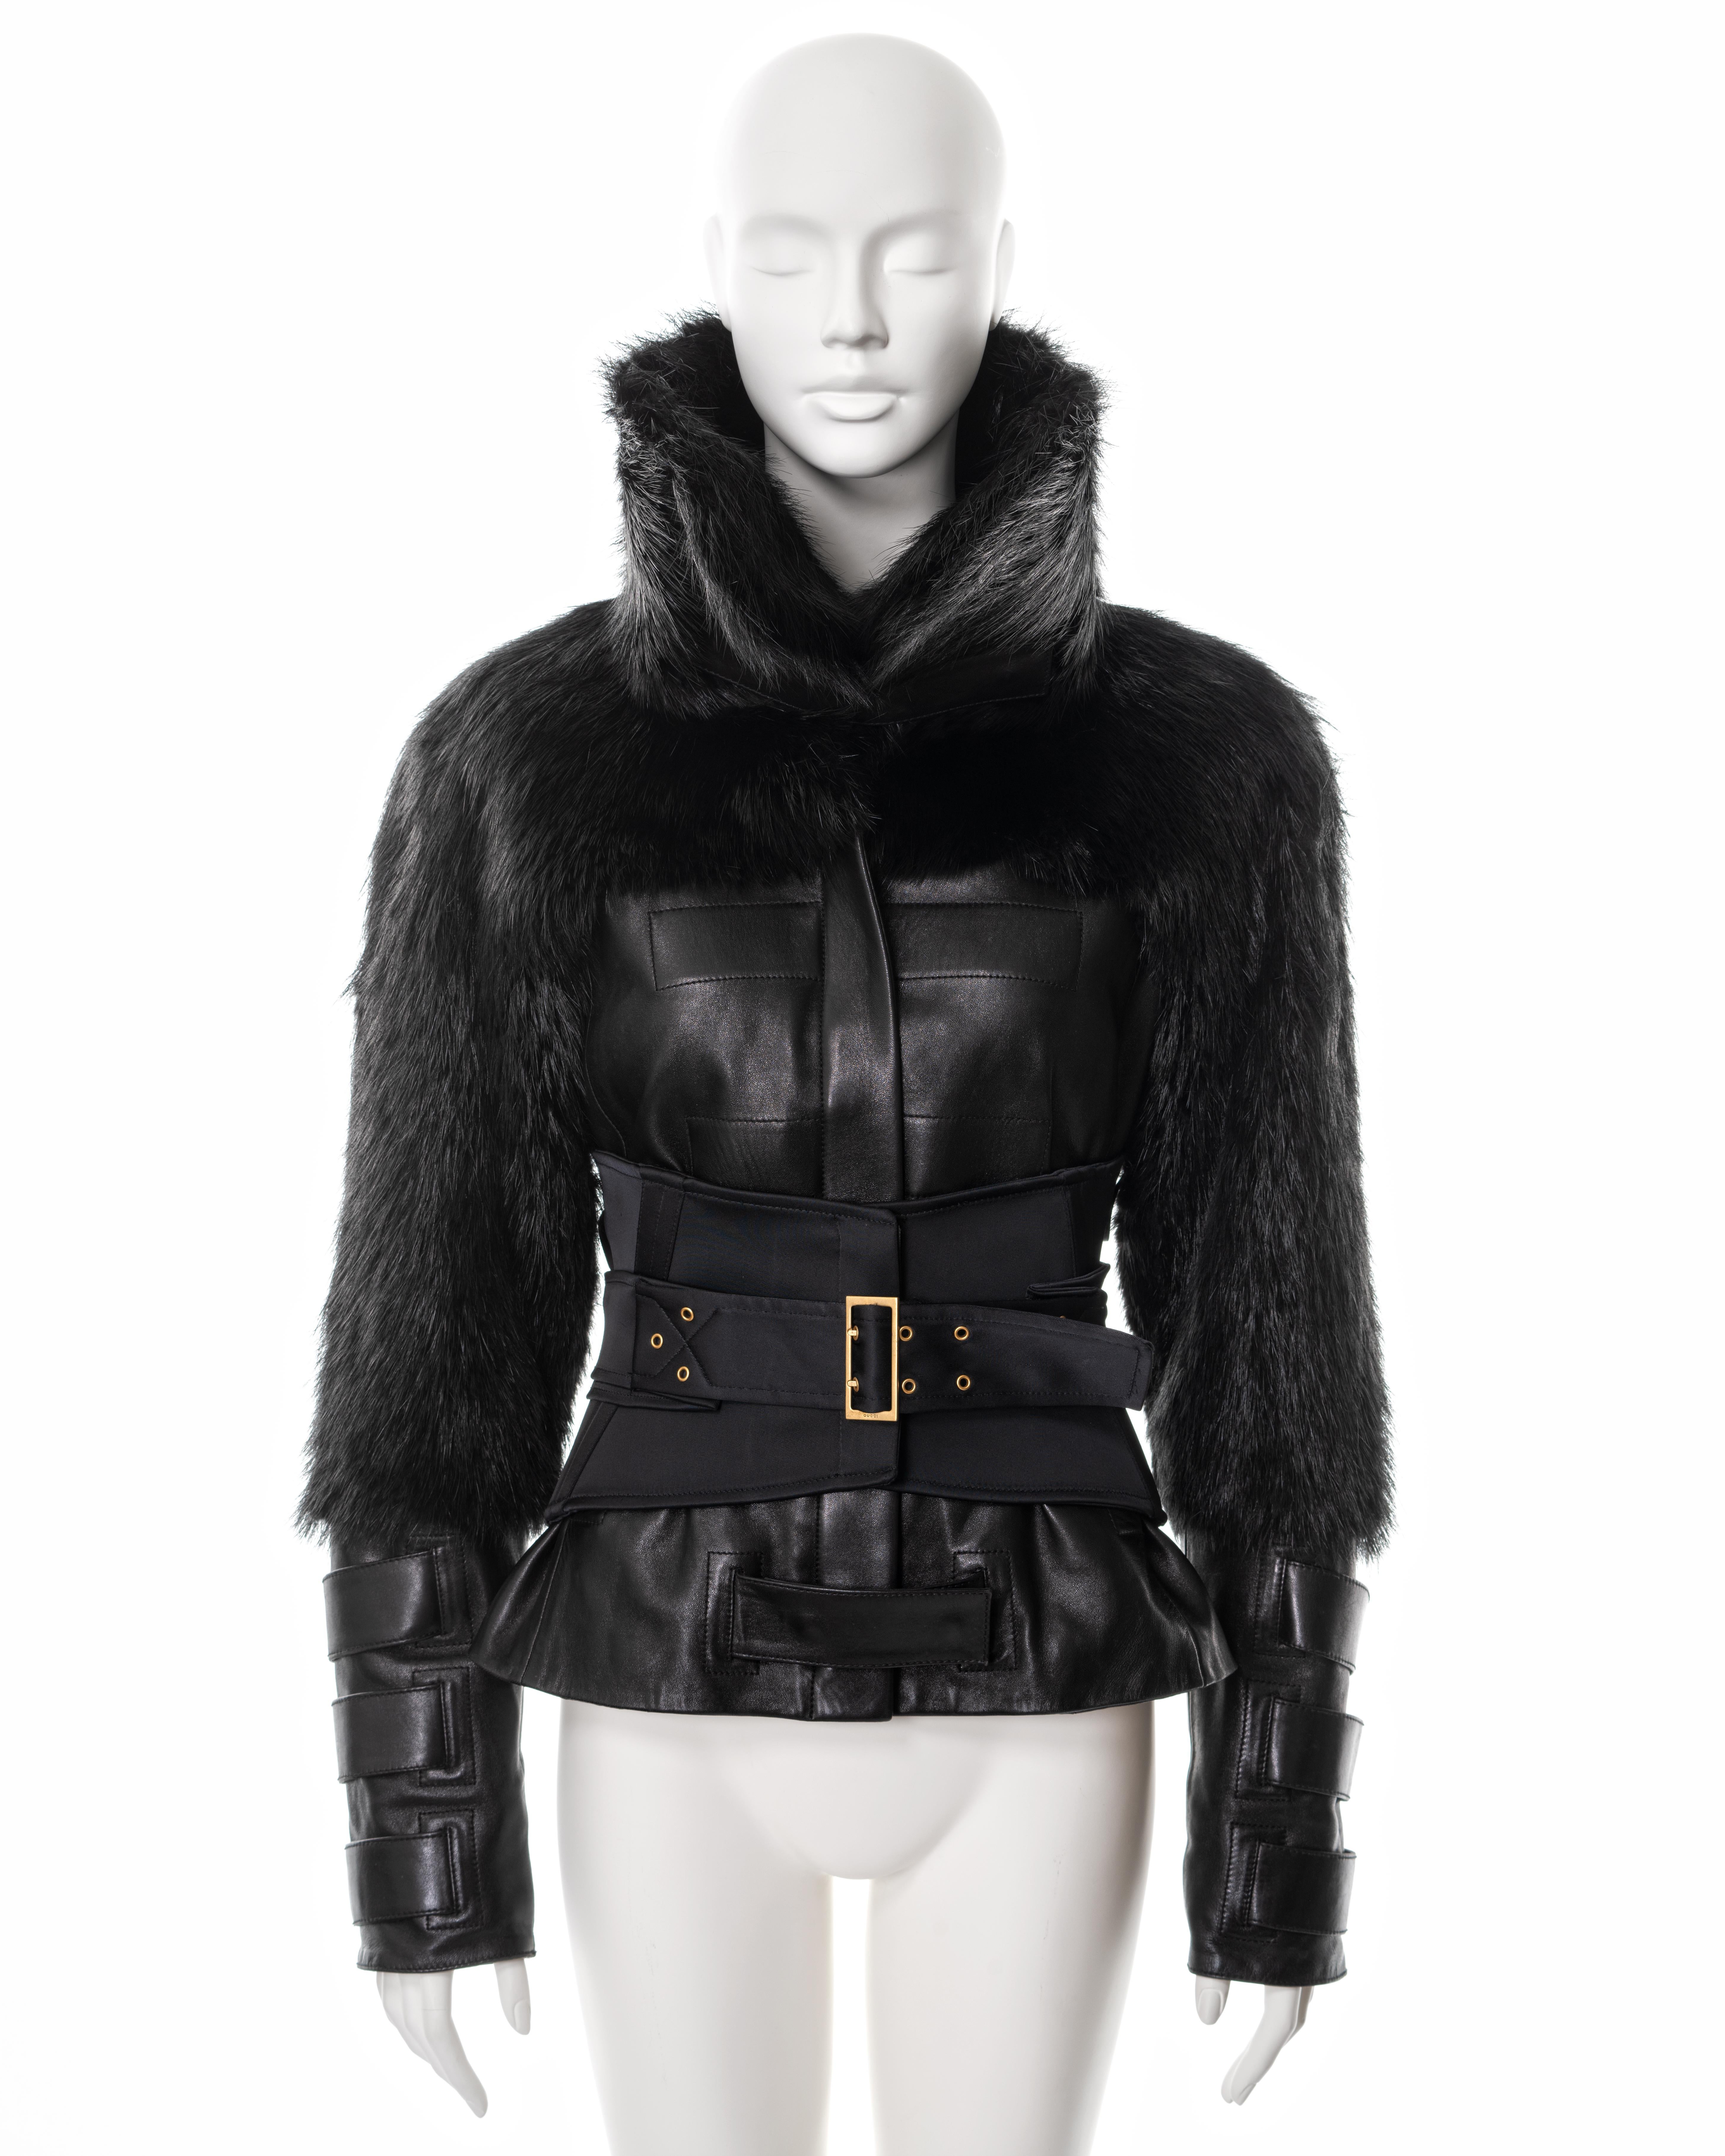 ▪ Gucci black leather and fur jacket 
▪ Designed by Tom Ford
▪ Sold by One of a Kind Archive
▪ Fall-Winter 2003
▪ Constructed from black leather and beaver fur 
▪ Large high-standing collar 
▪ Zip and press-stud closures 
▪ 3-strap detail on cuffs